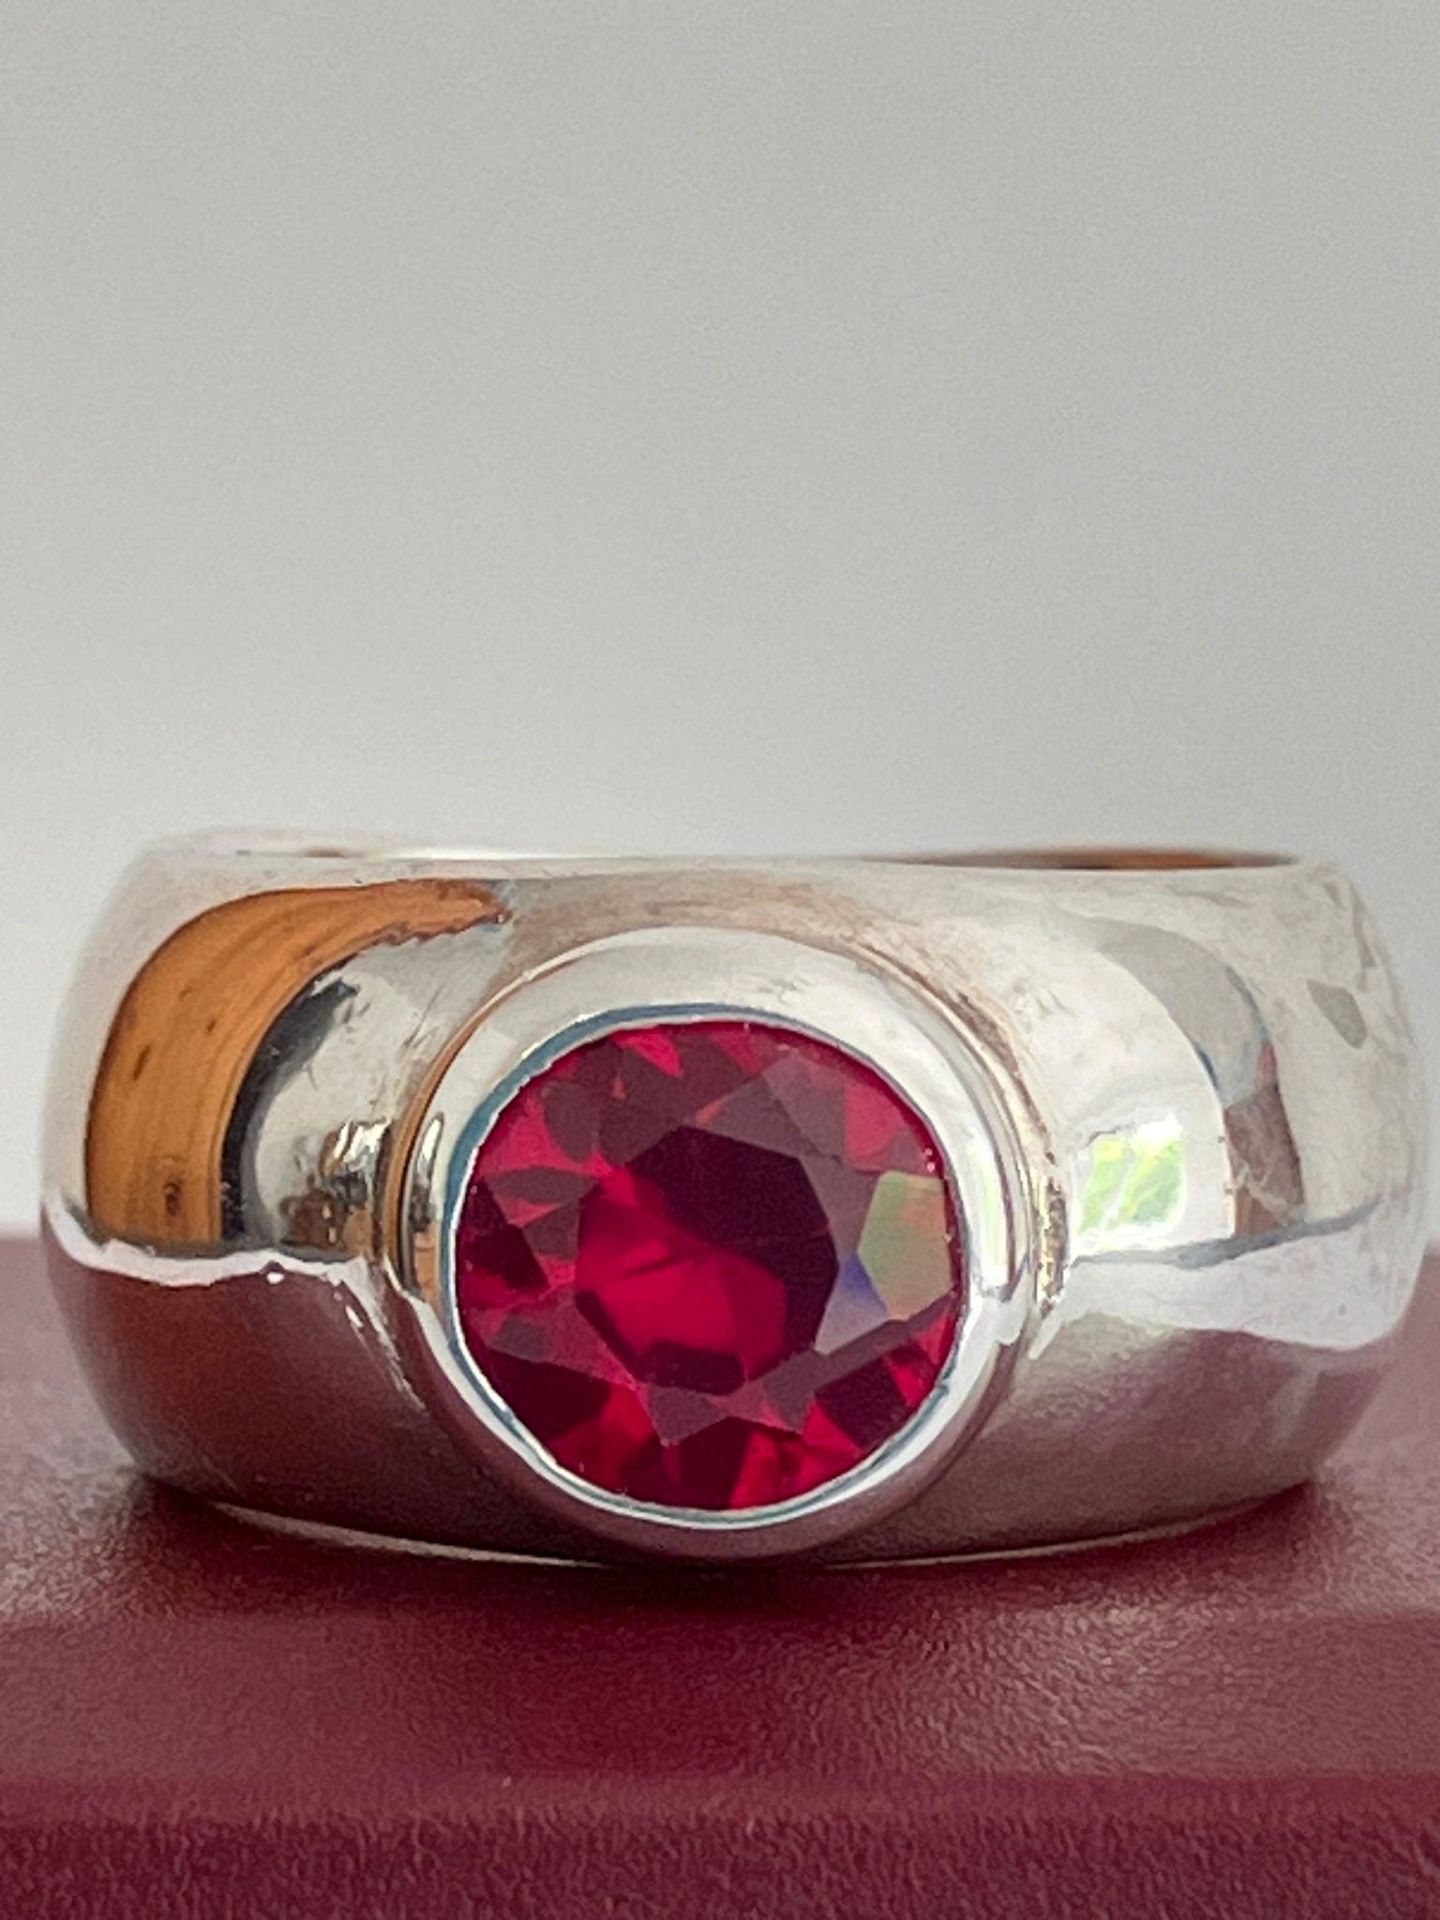 SILVER and RUBY RING, consisting a 1.5 carat Round Cut Ruby mounted to top of a Wide Silver Band.